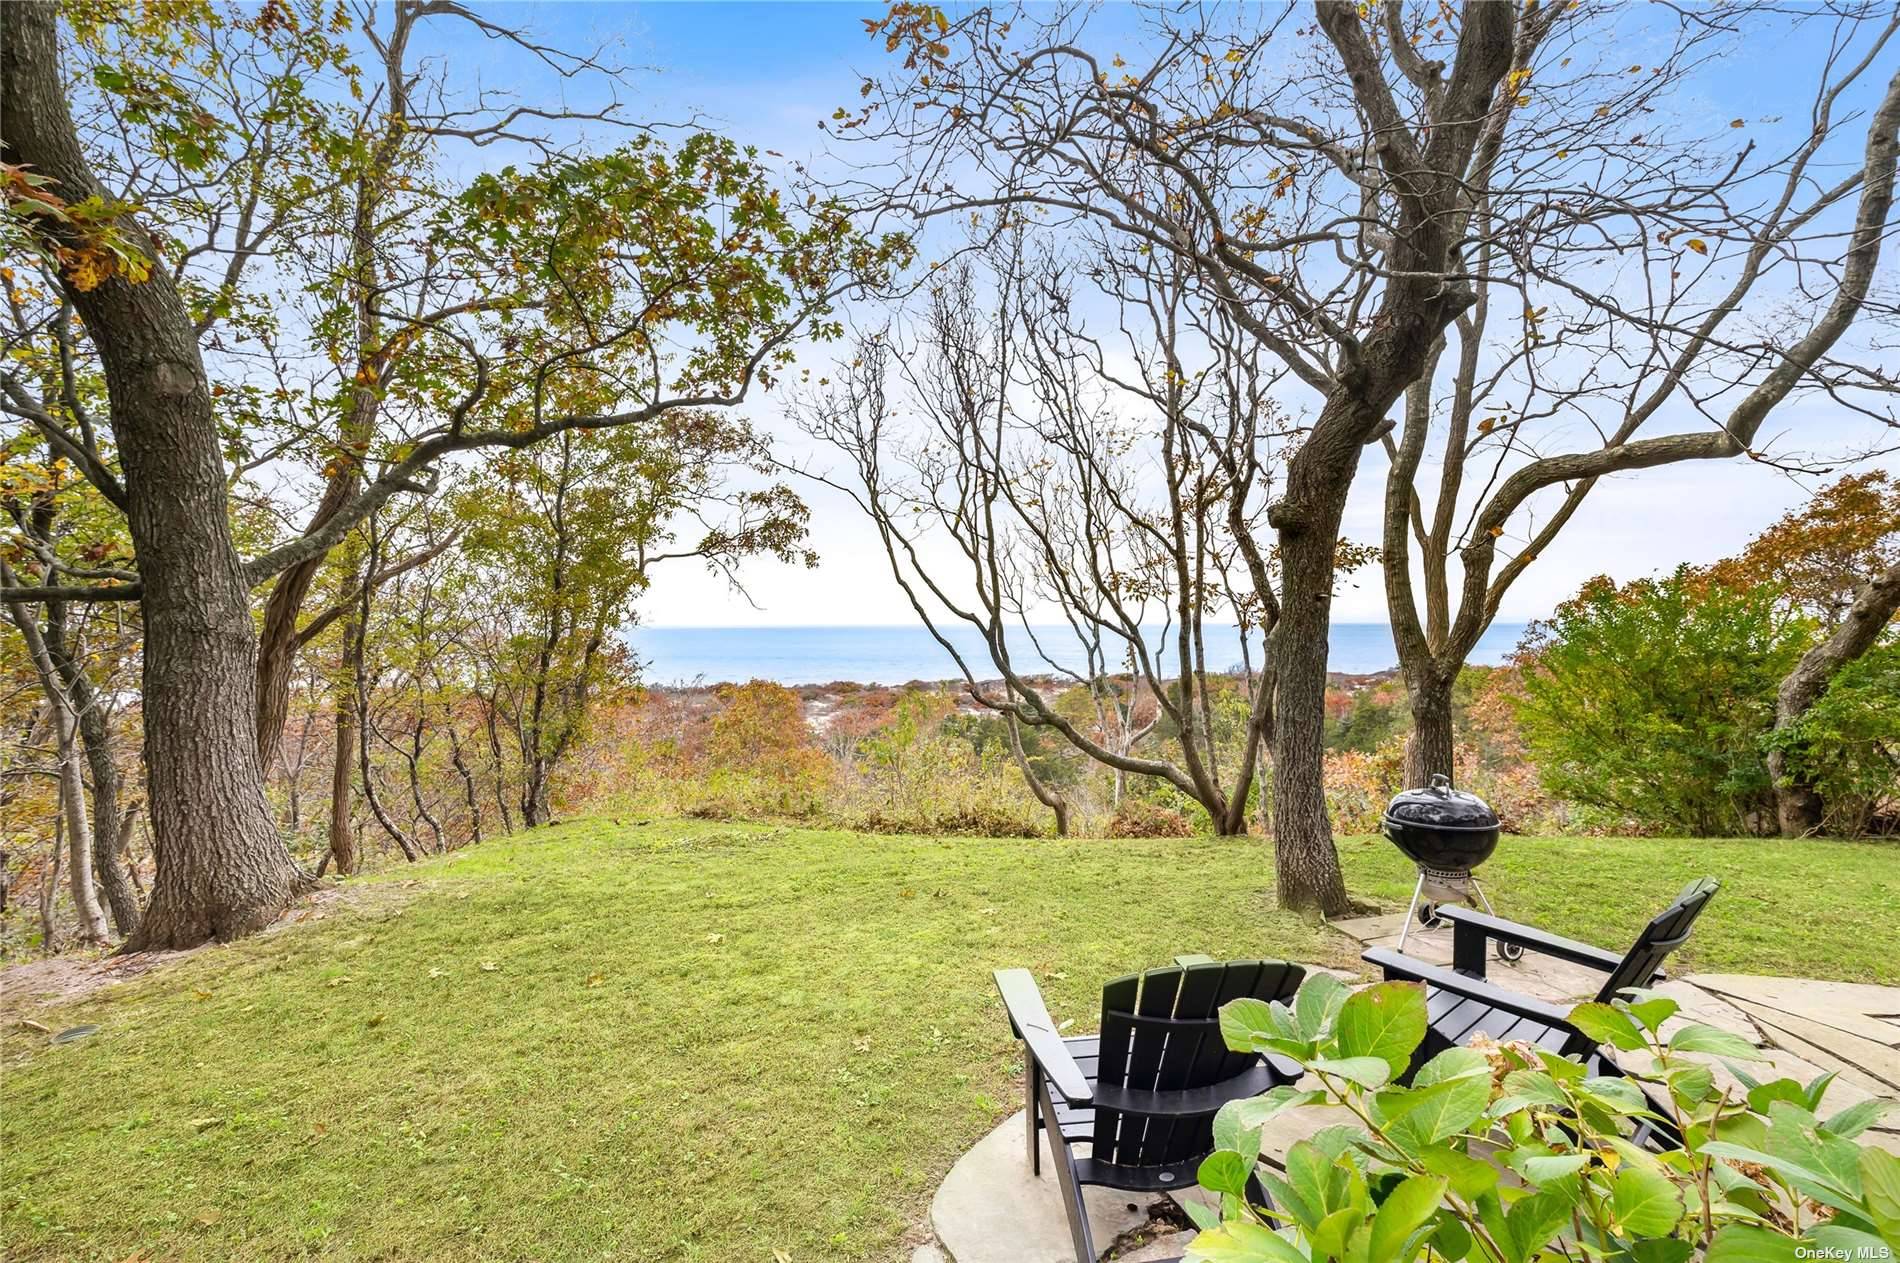 Enjoy stunning water views and all season access to the Sound from this charming 3 bedroom, 1 bathroom waterfront home.